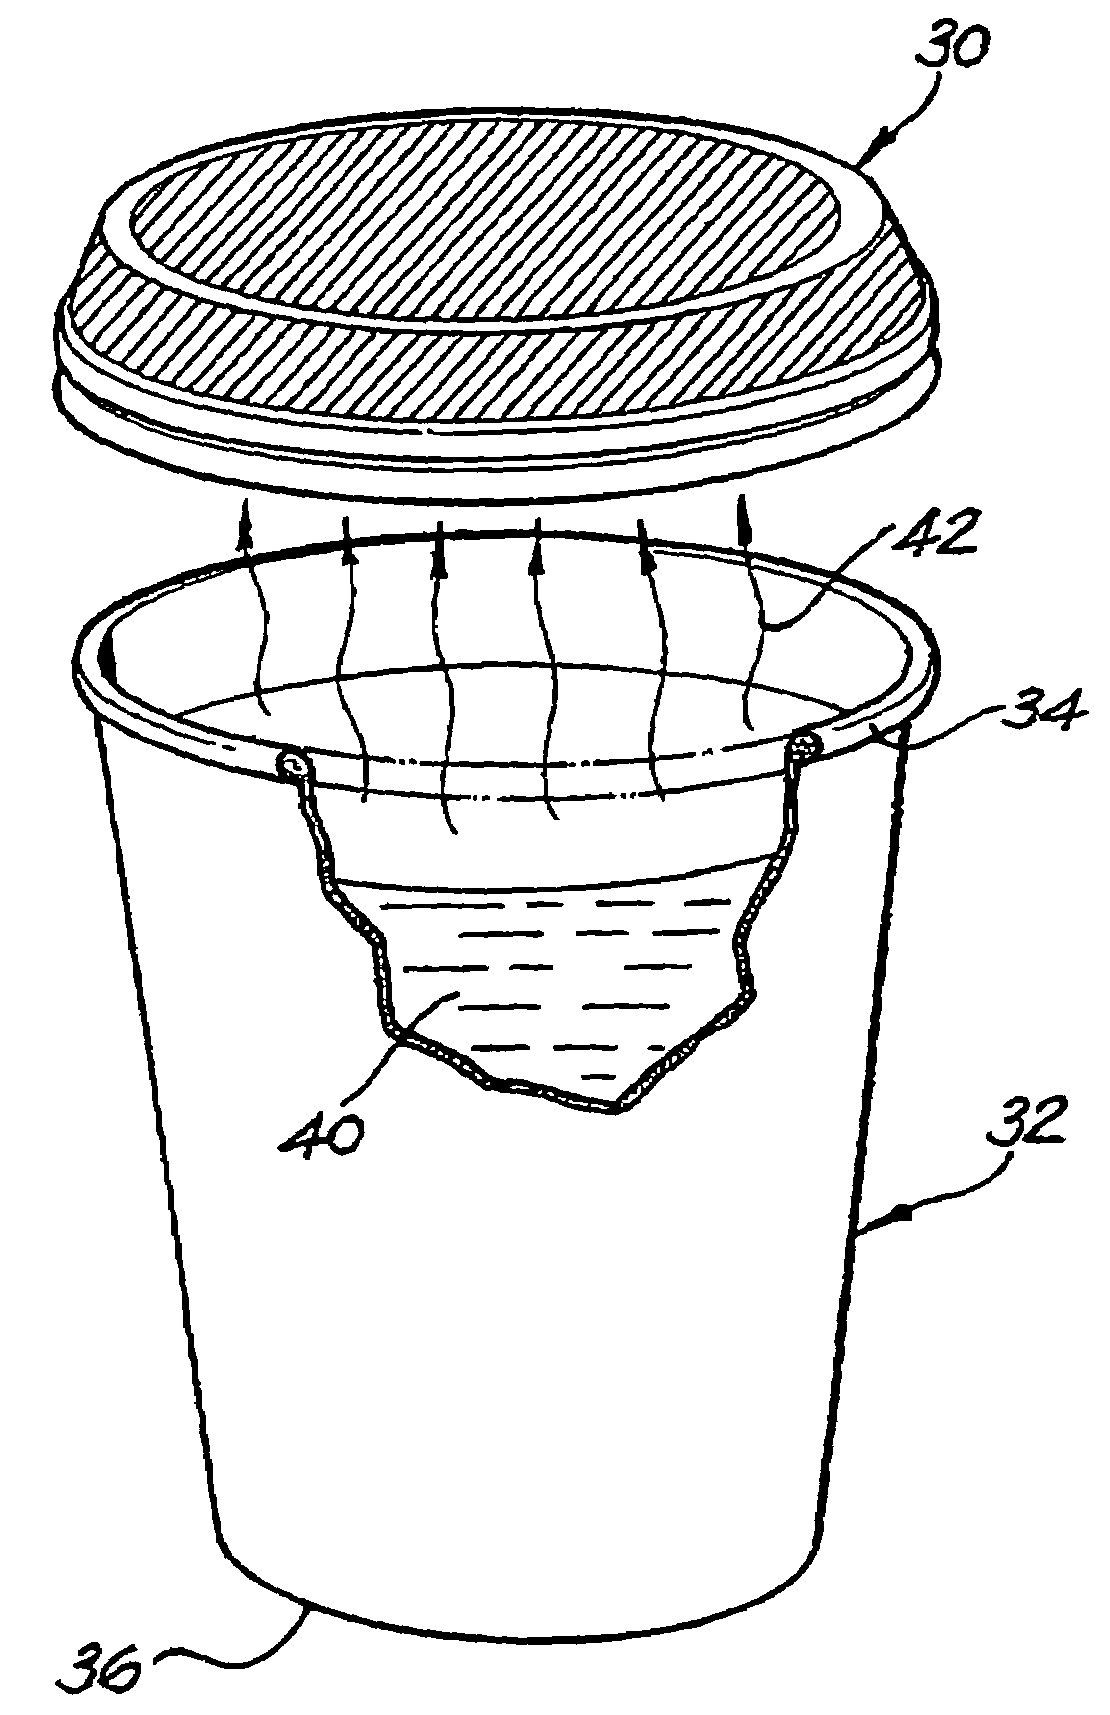 Lid for a disposable beverage container